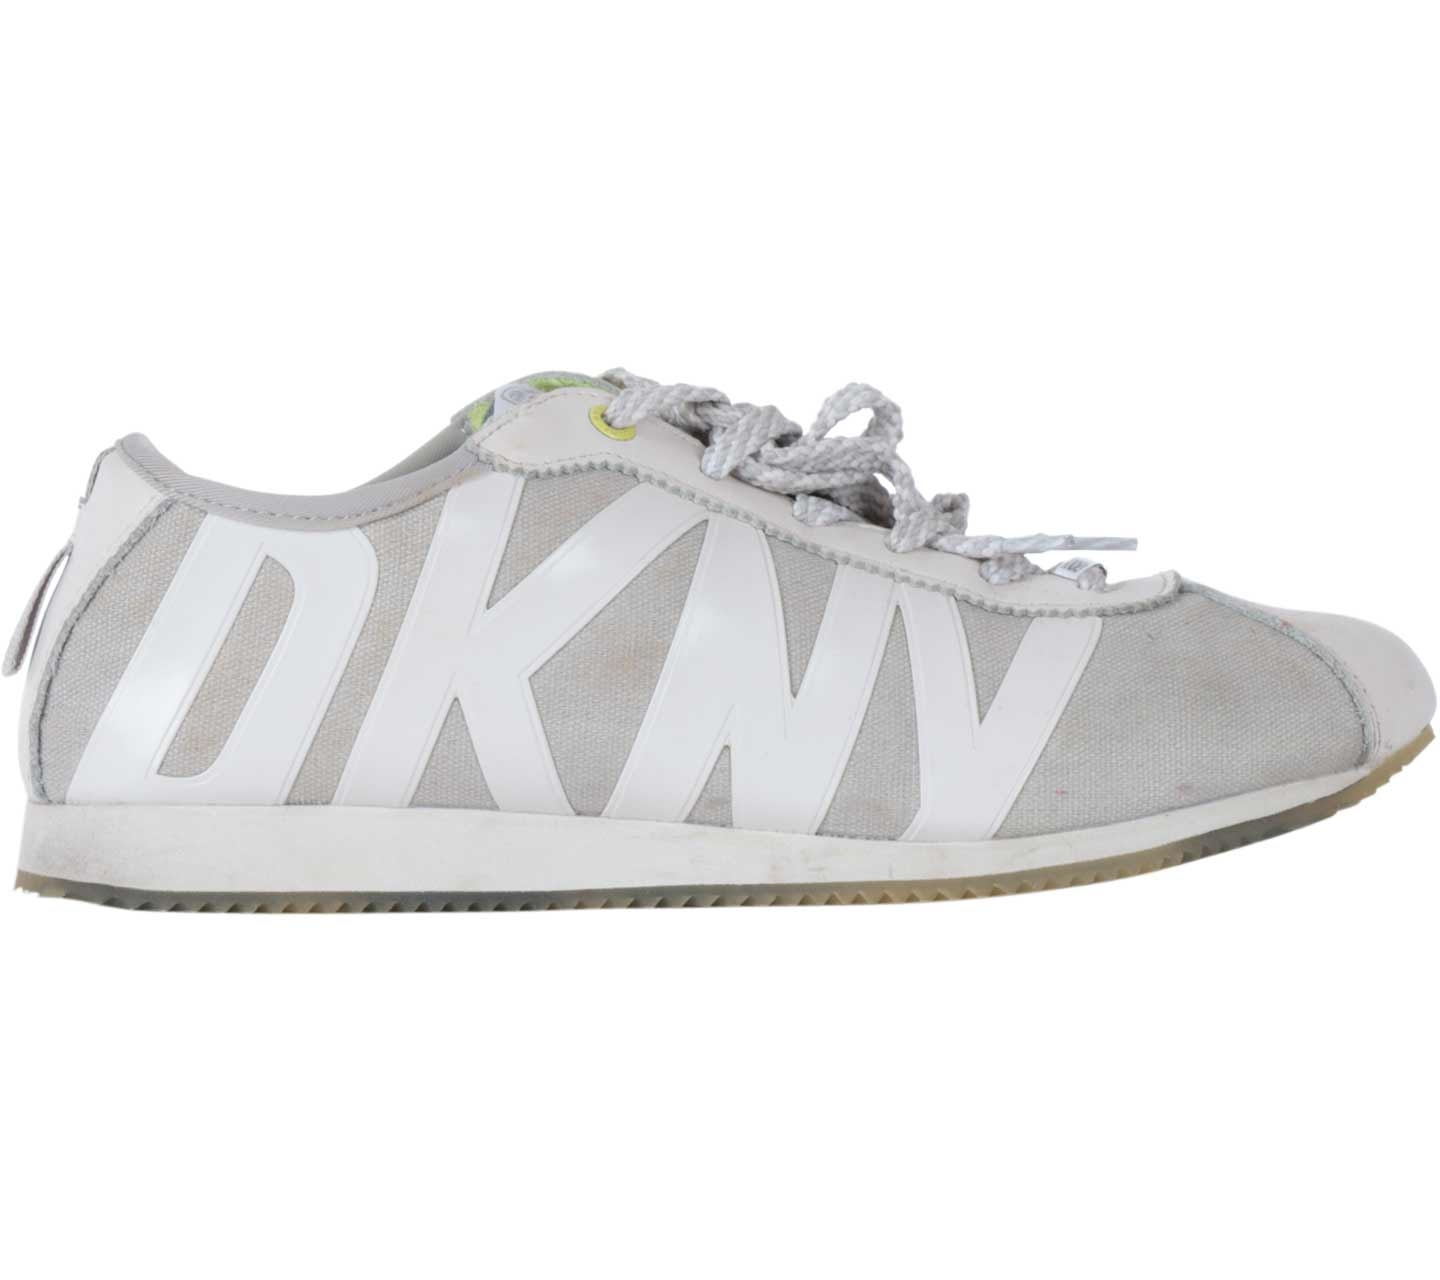 DKNY Multi Colour Sneakers